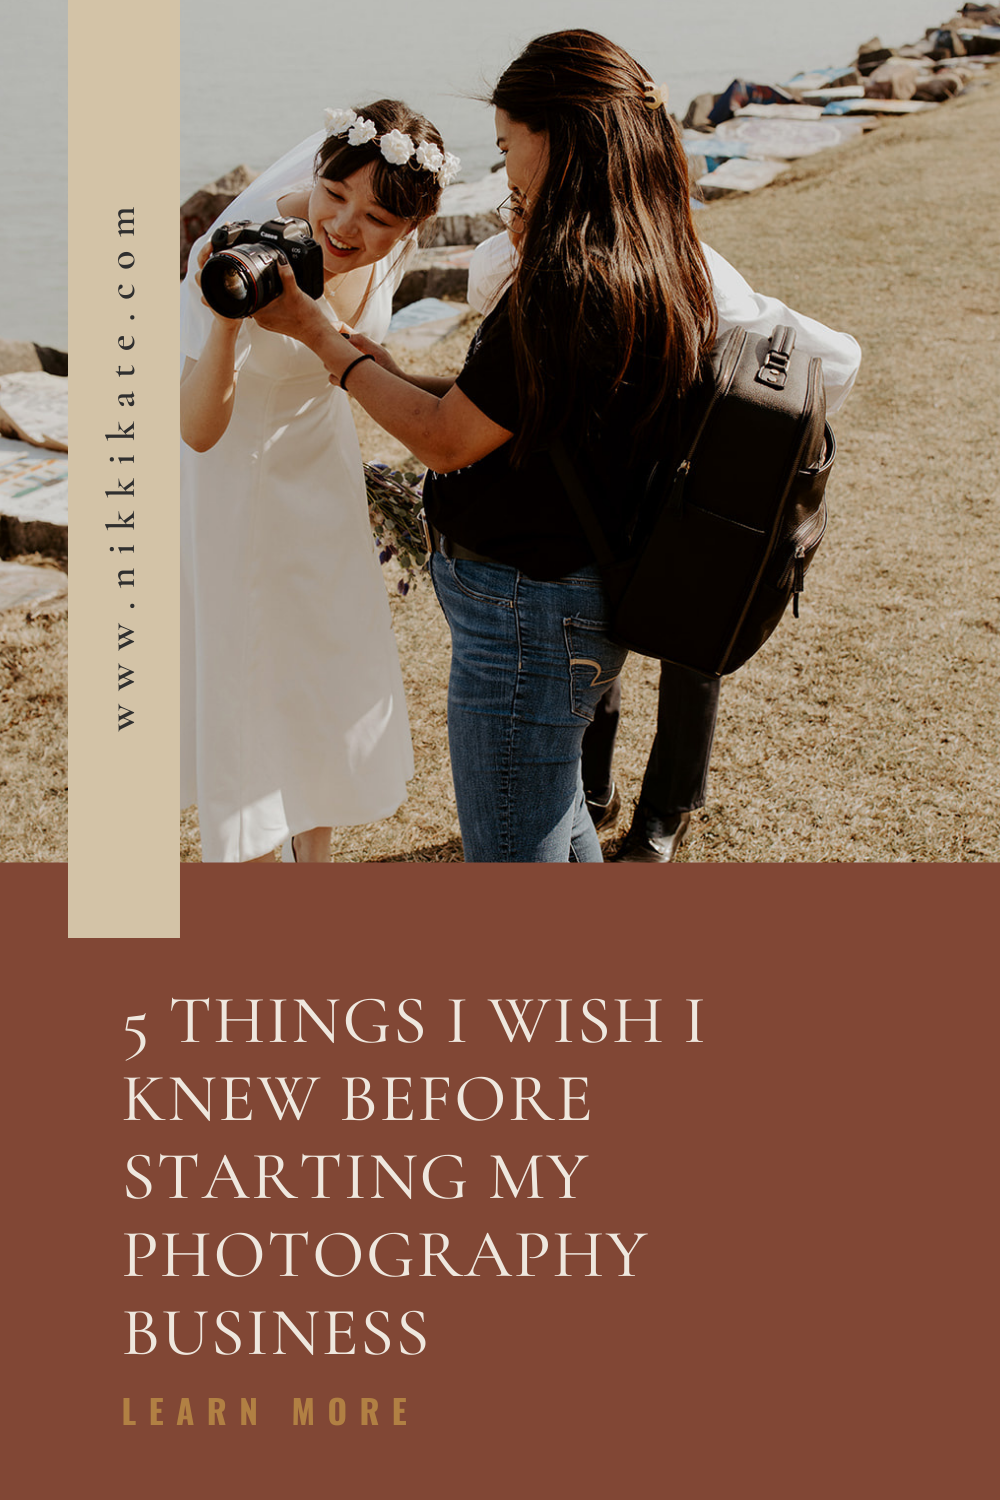 5-things-I-wish-I-knew-before-starting-my-photography-business-nikki-kate-photography (3).png